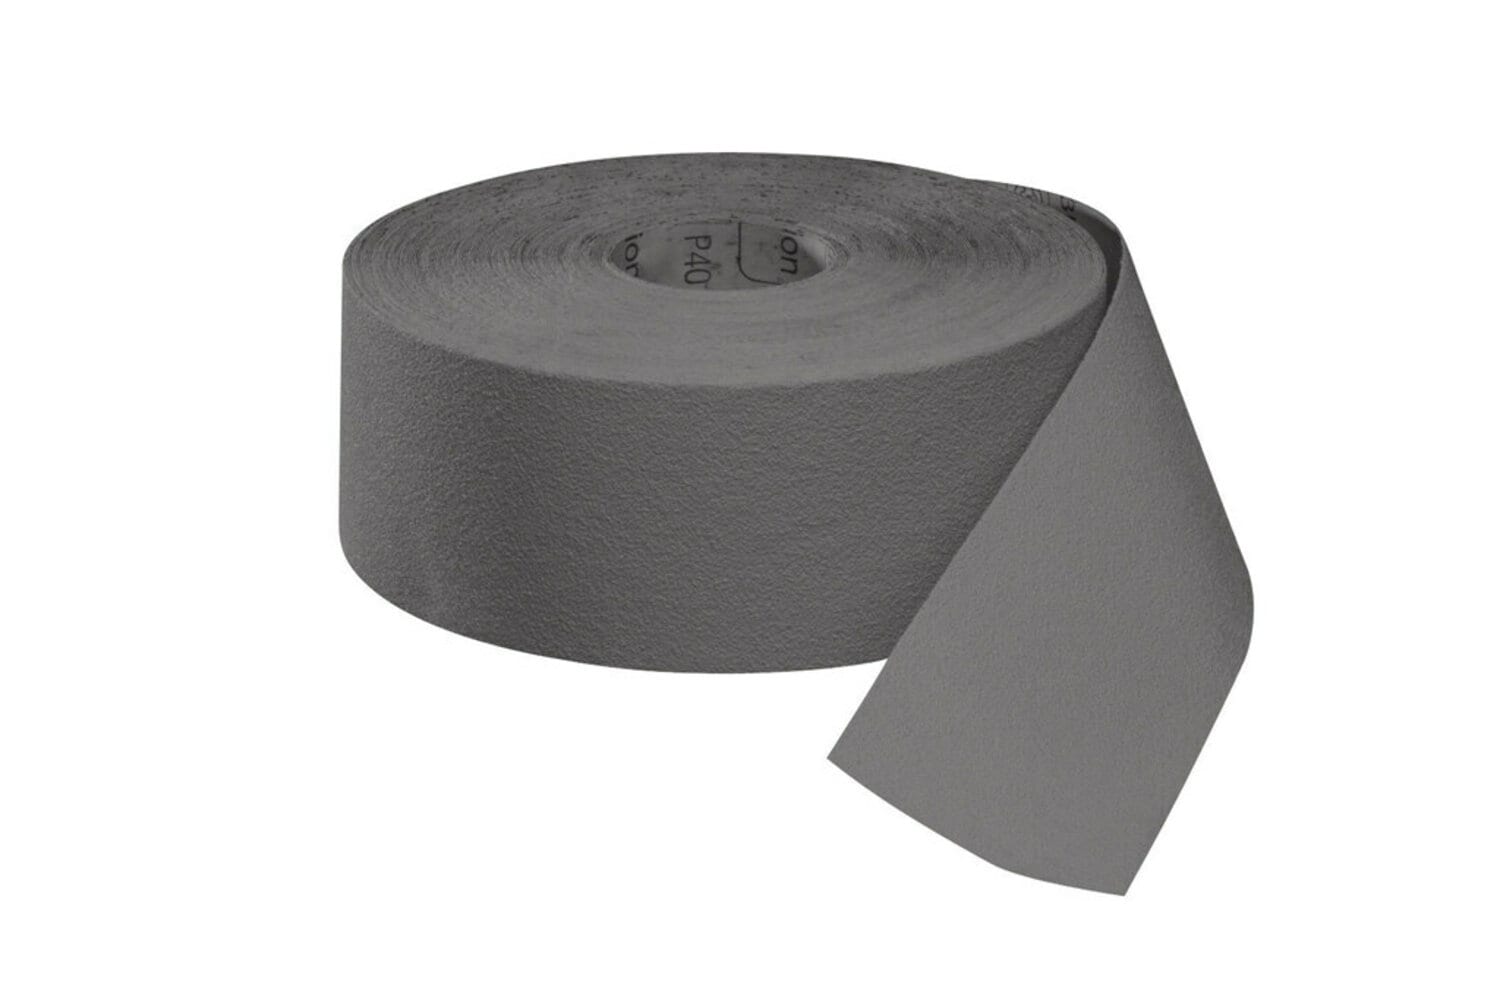 7100070180 - 3M Wetordry Paper Roll 431Q, 120 C-weight, Config